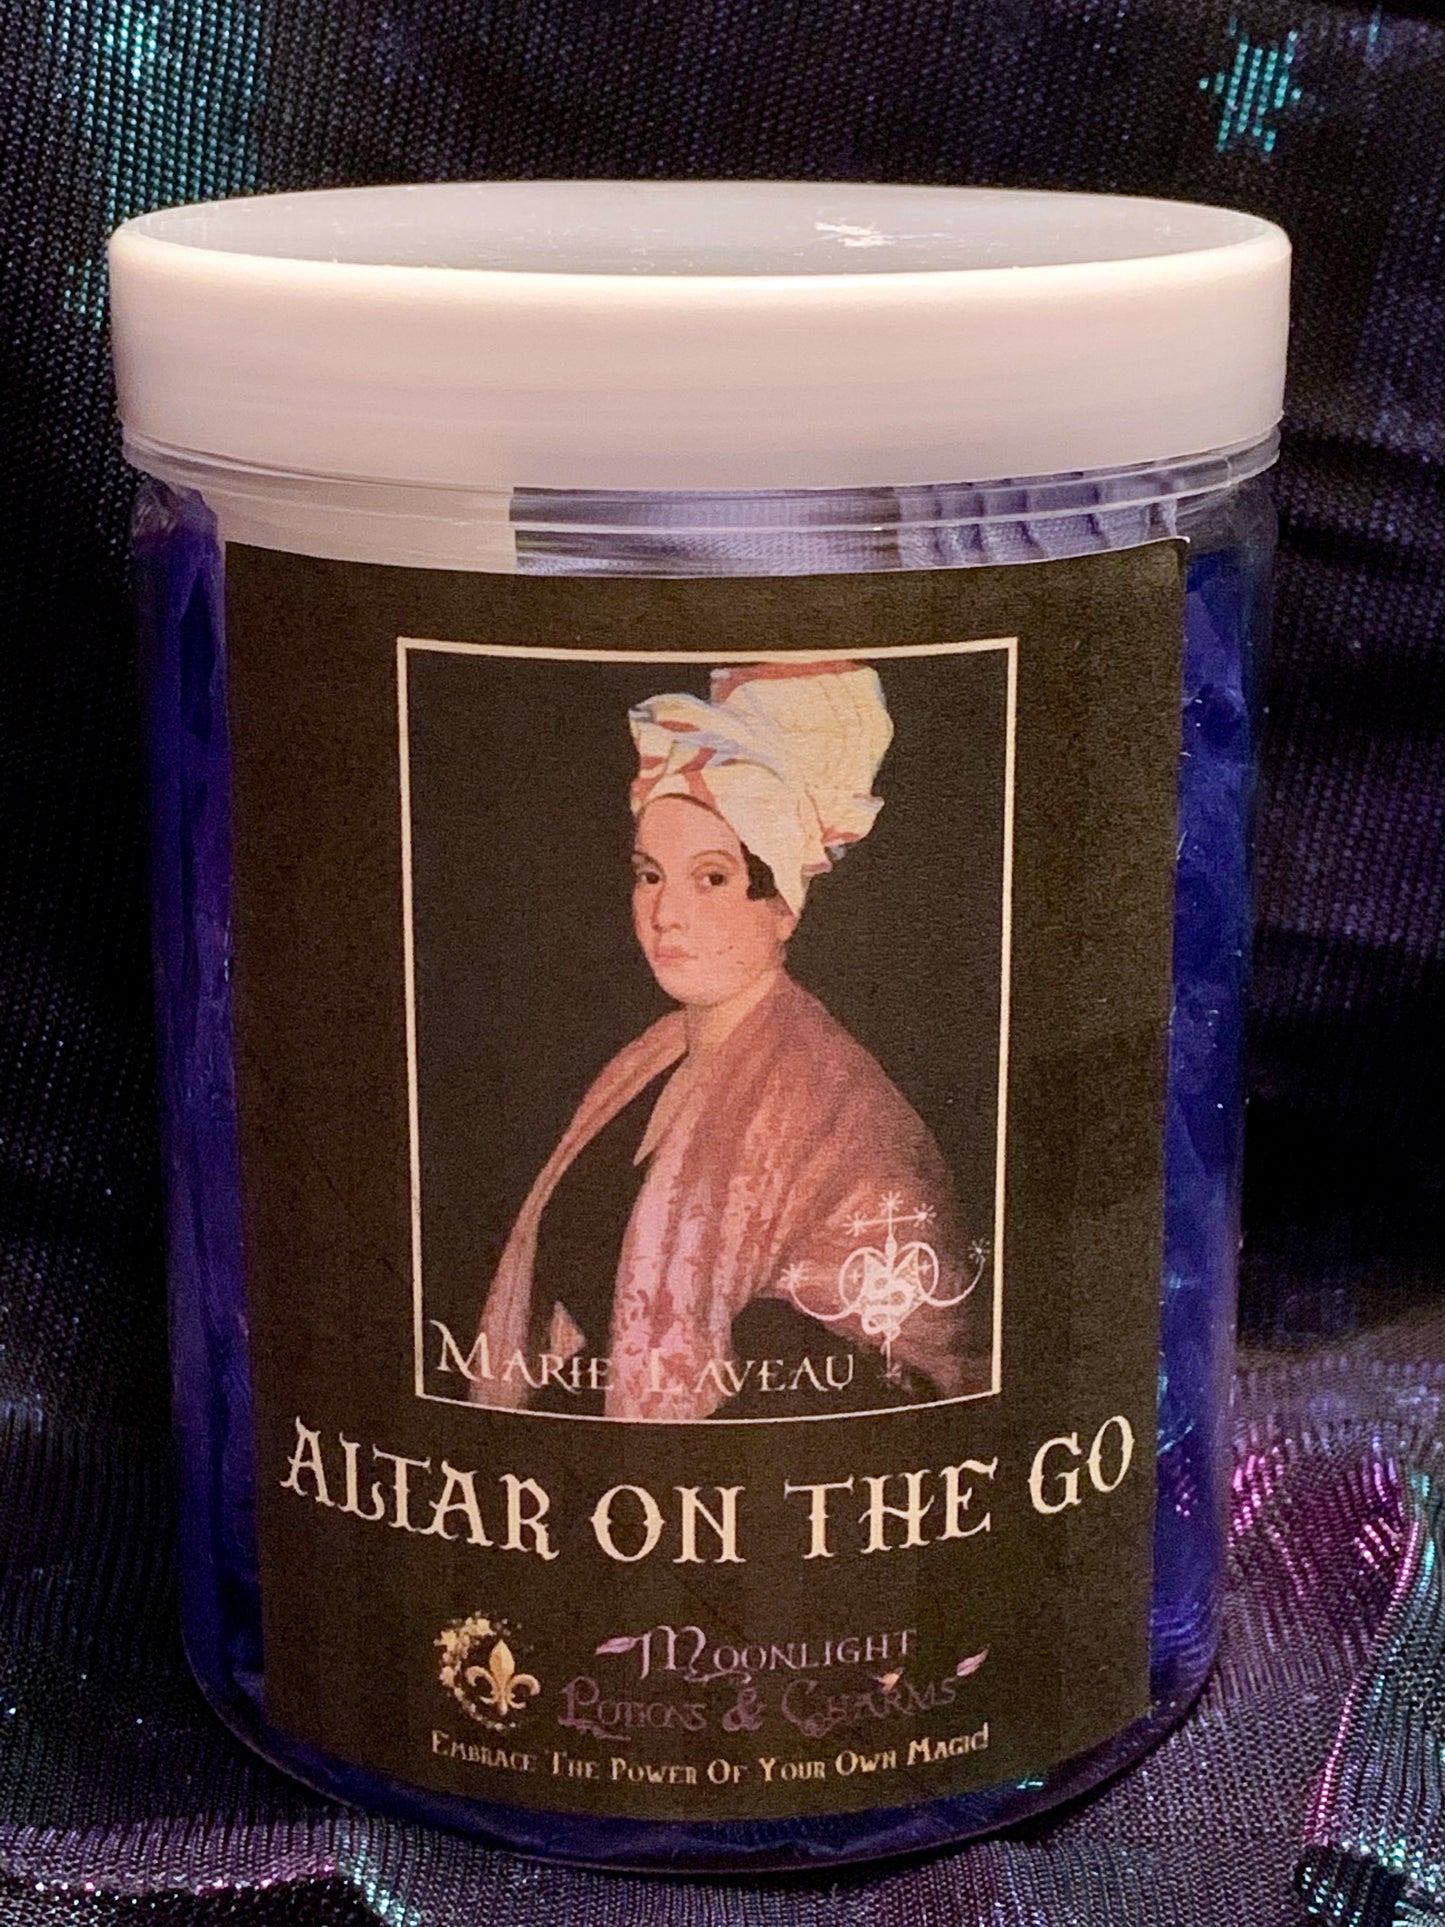 Marie Laveau Altar On The Go - Moonlight Potions & Charms